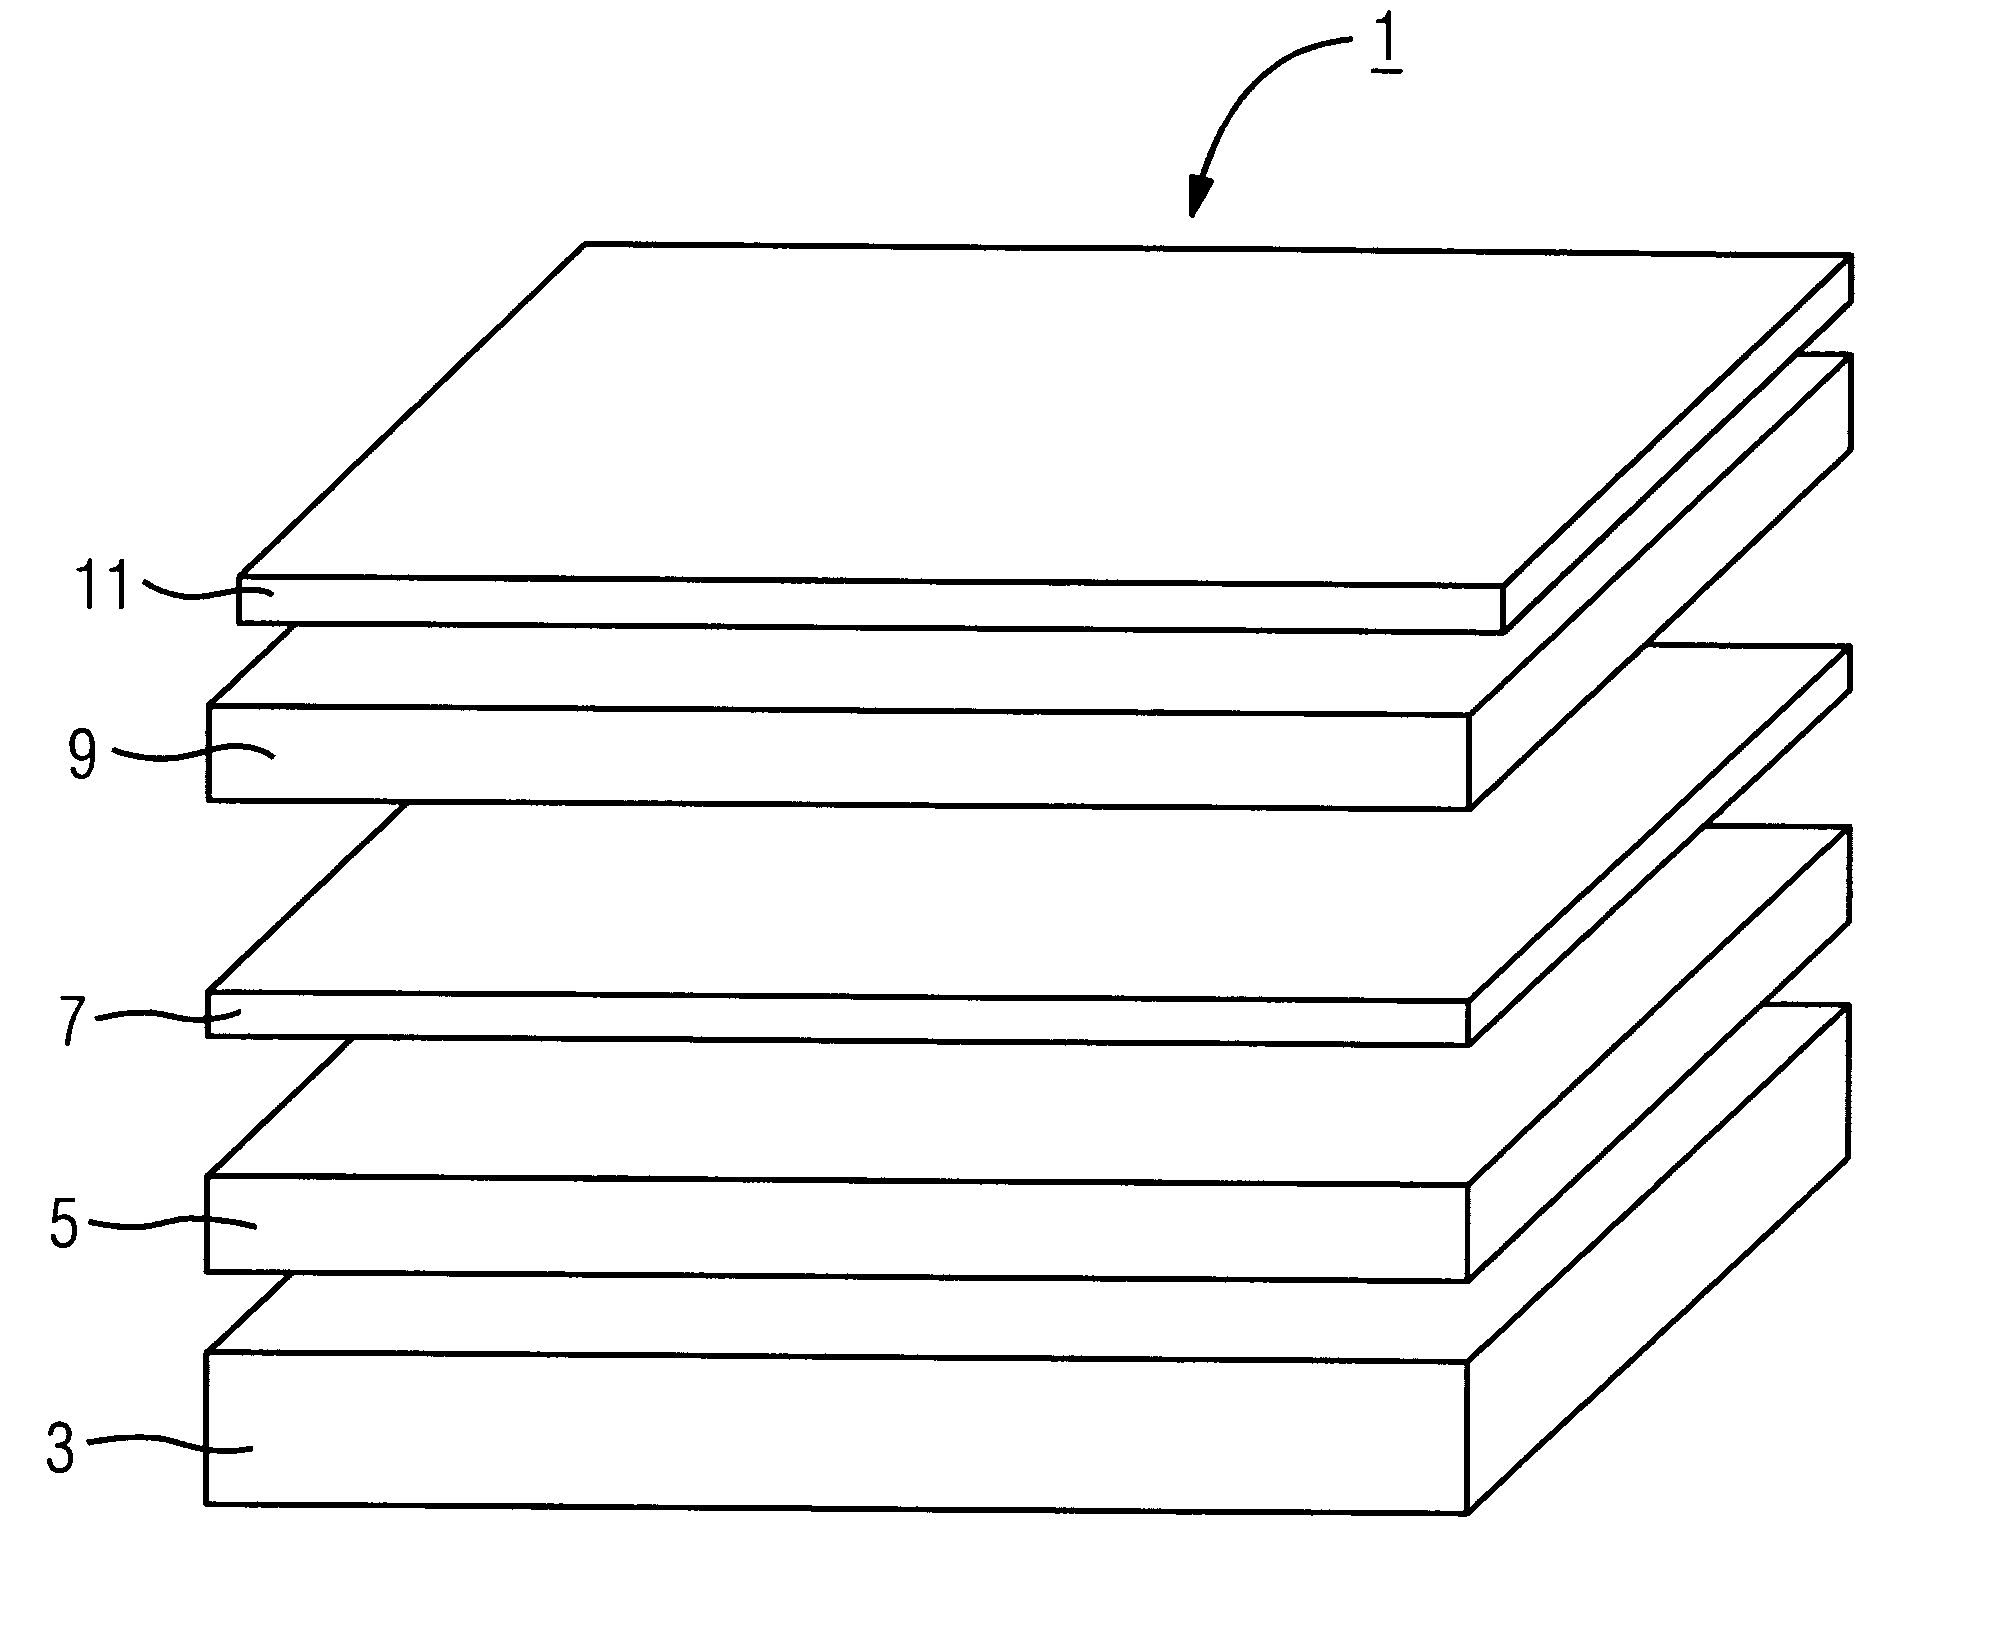 X-ray detector including a scintillator with a photosensor coating, and a production process